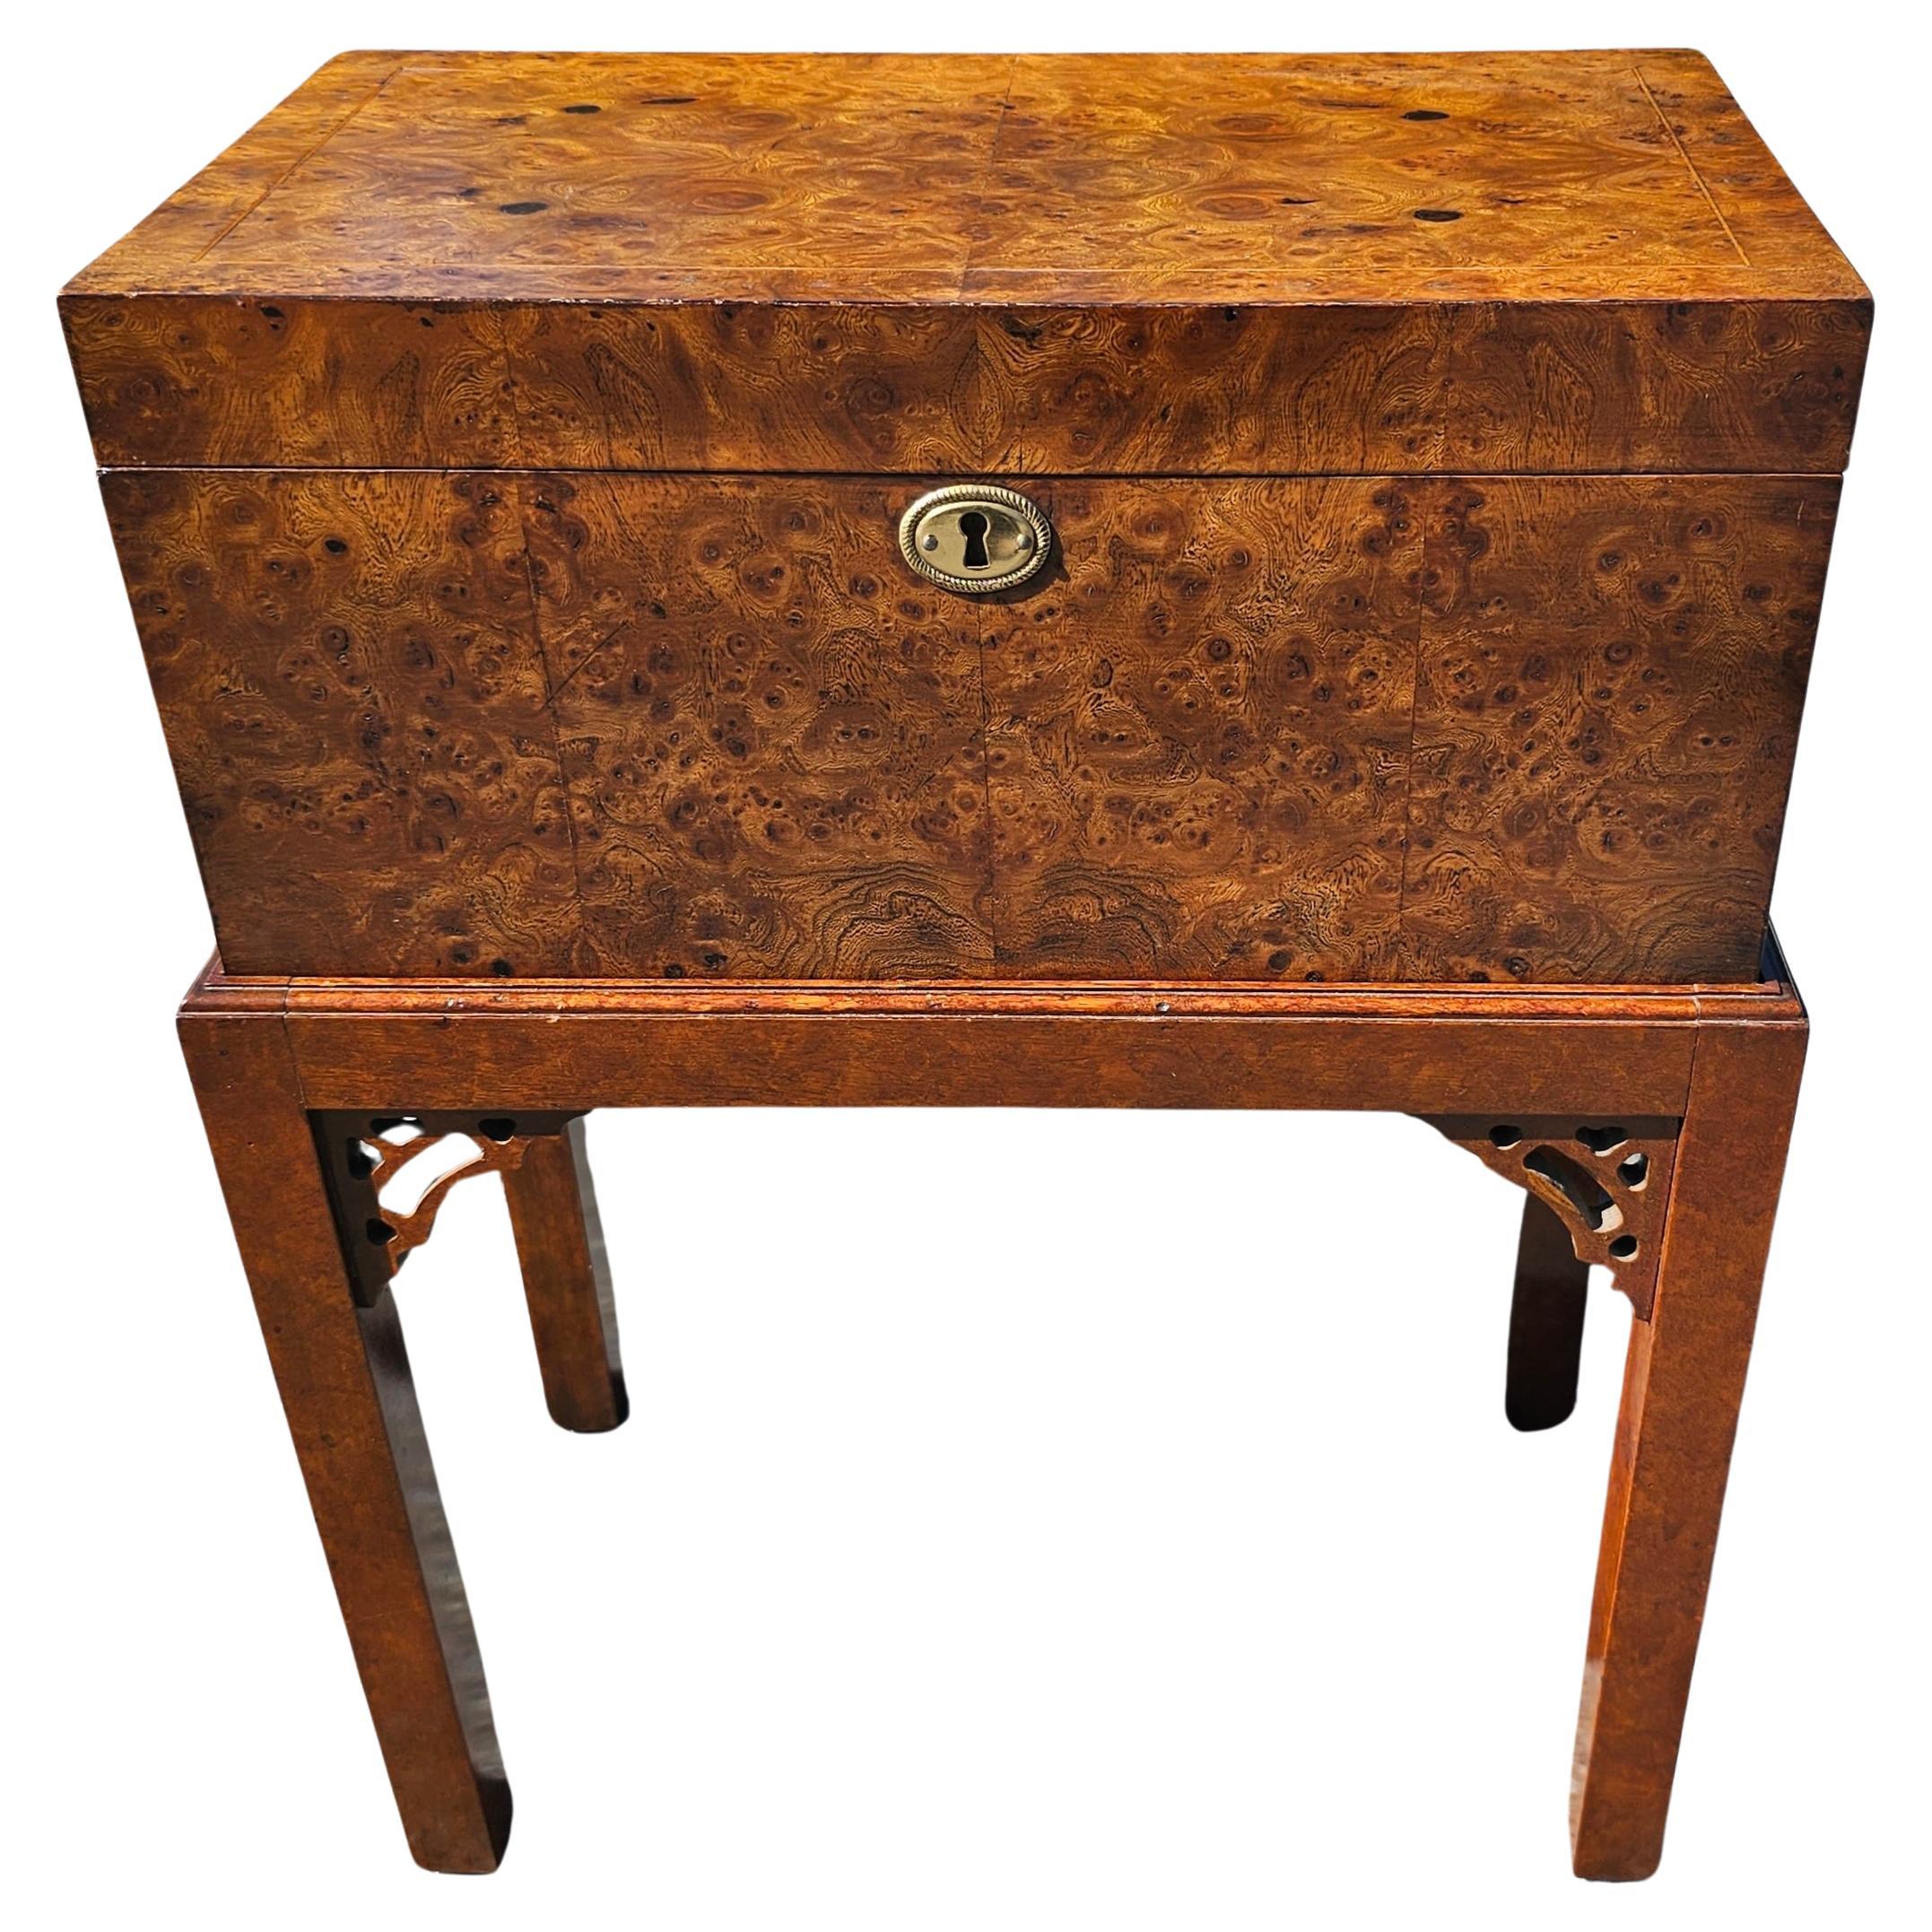 20th Century English Style Yew Wood Chest on Stand For Sale